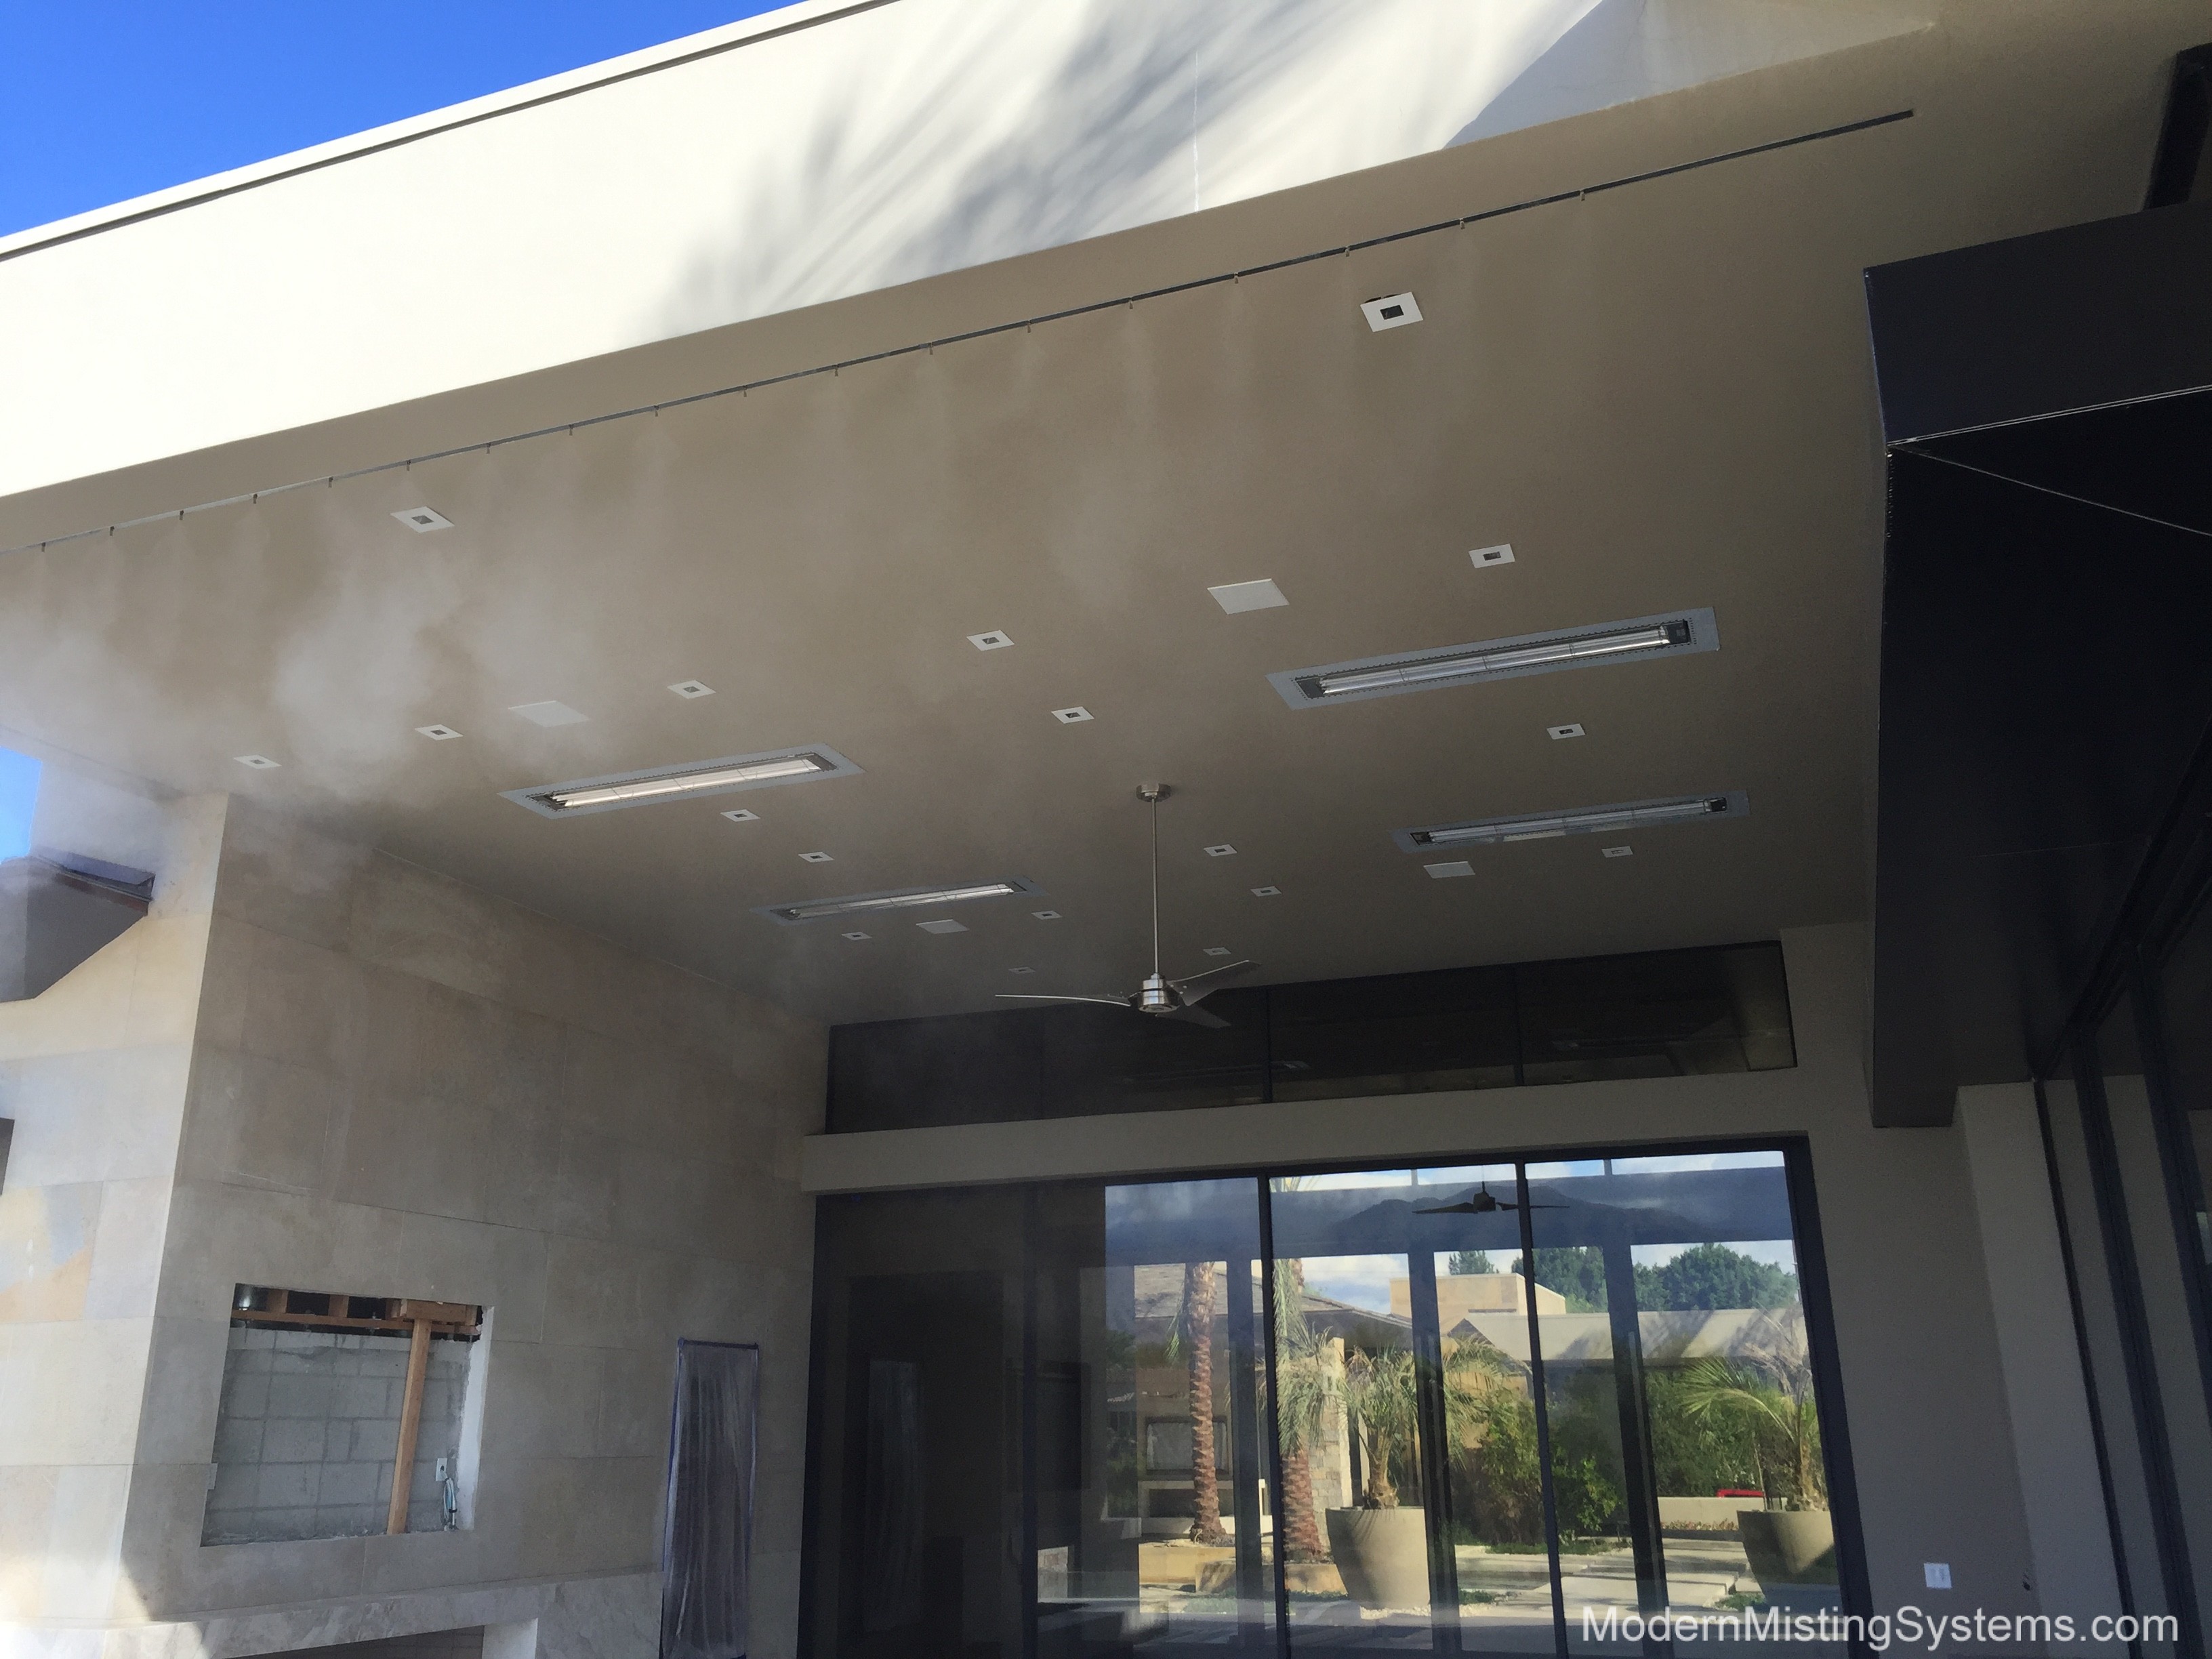 Patio heaters from Modern Misting Systems make the outdoor life a year round pleasure!